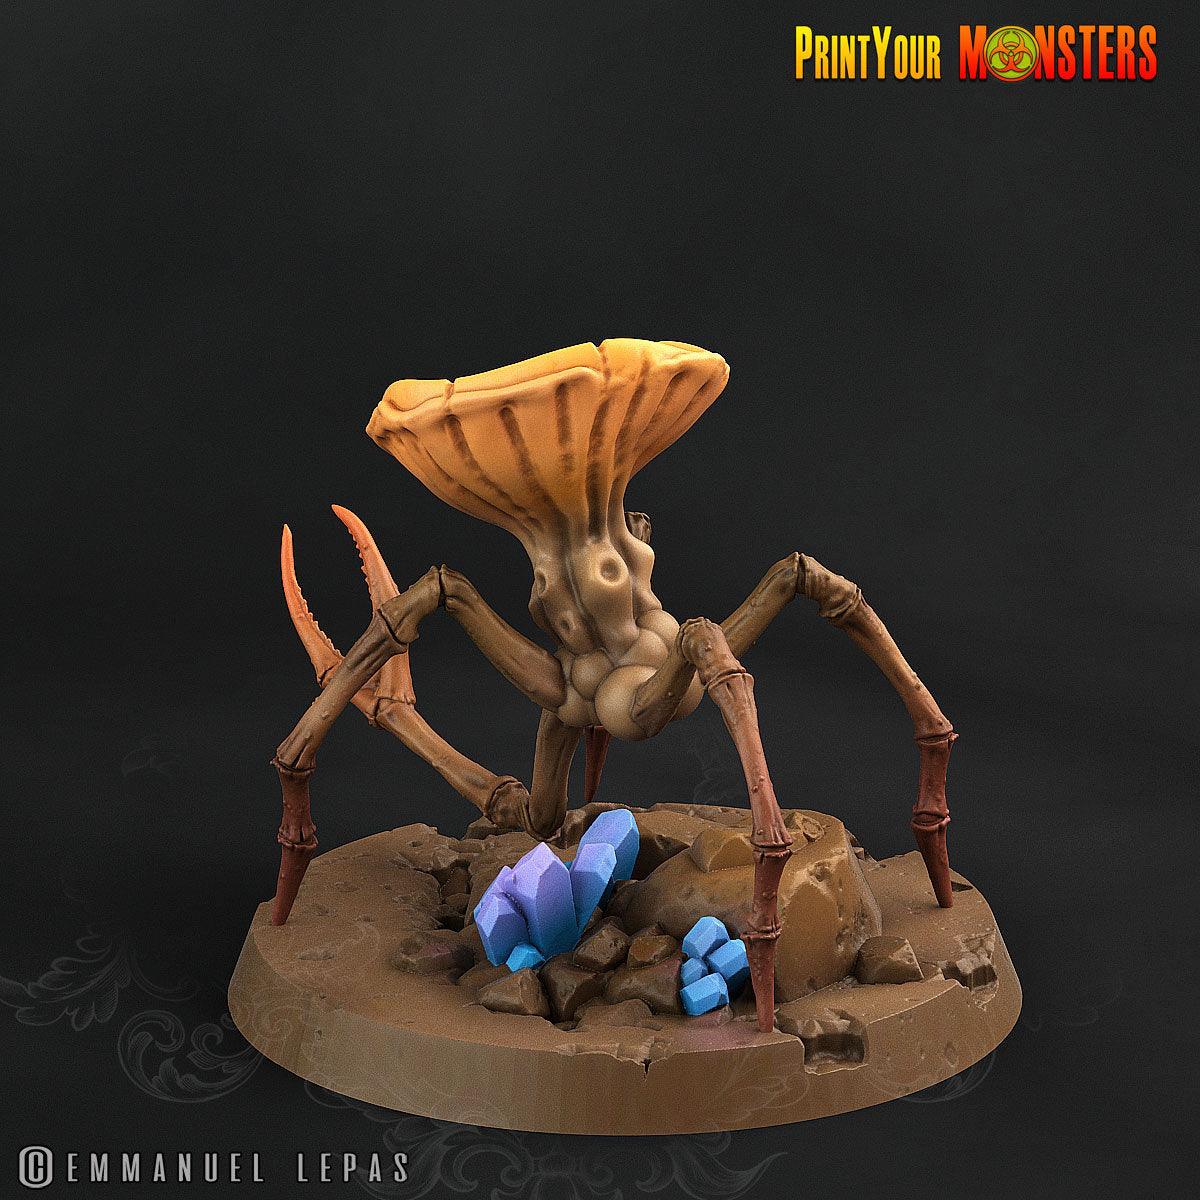 Mushroom Spiders Miniatures | Forest Monsters | Tabletop gaming | DnD Miniature | Dungeons and Dragons dnd monster miniatures fungi figure - Plague Miniatures shop for DnD Miniatures